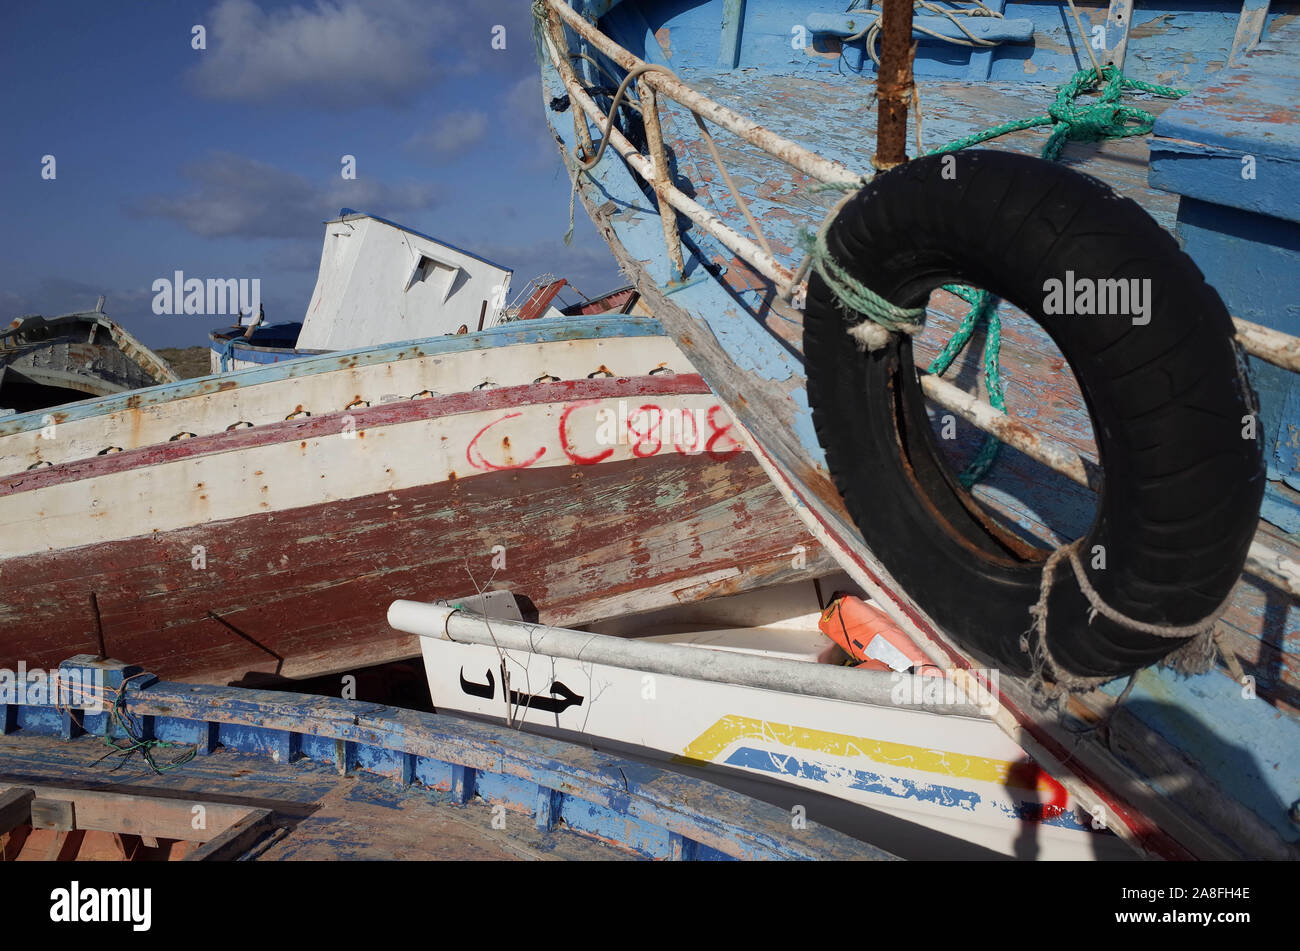 *** STRICTLY NO SALES TO FRENCH MEDIA OR PUBLISHERS *** October 21, 2019 - Lampedusa, Italia: Several boats used by migrants to cross the Mediterranean between North Africa and the Italian island of Lampedusa are abandoned in a 'boat cemetery'. Most are small Tunisian fishing vessels. Cimetiere de bateaux de migrants a Lampedusa. Stock Photo